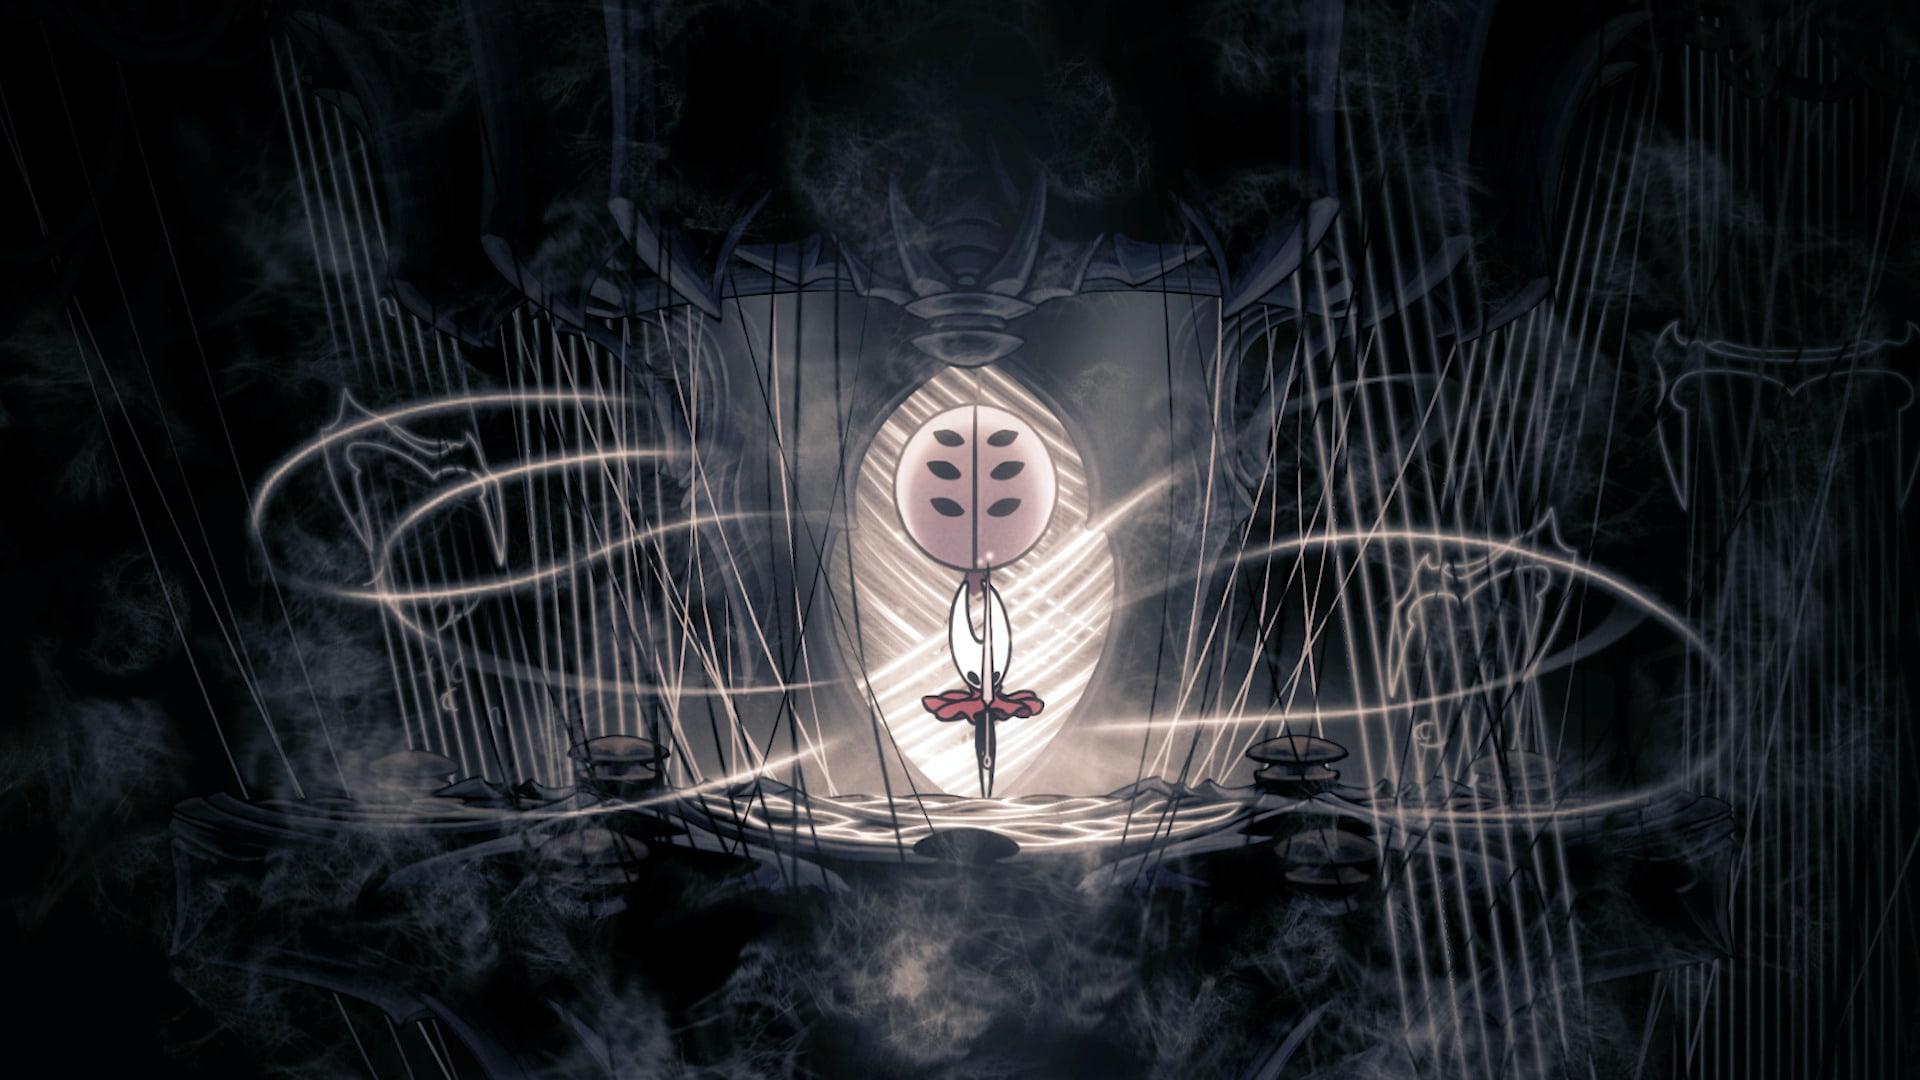 hollow knight silksong background